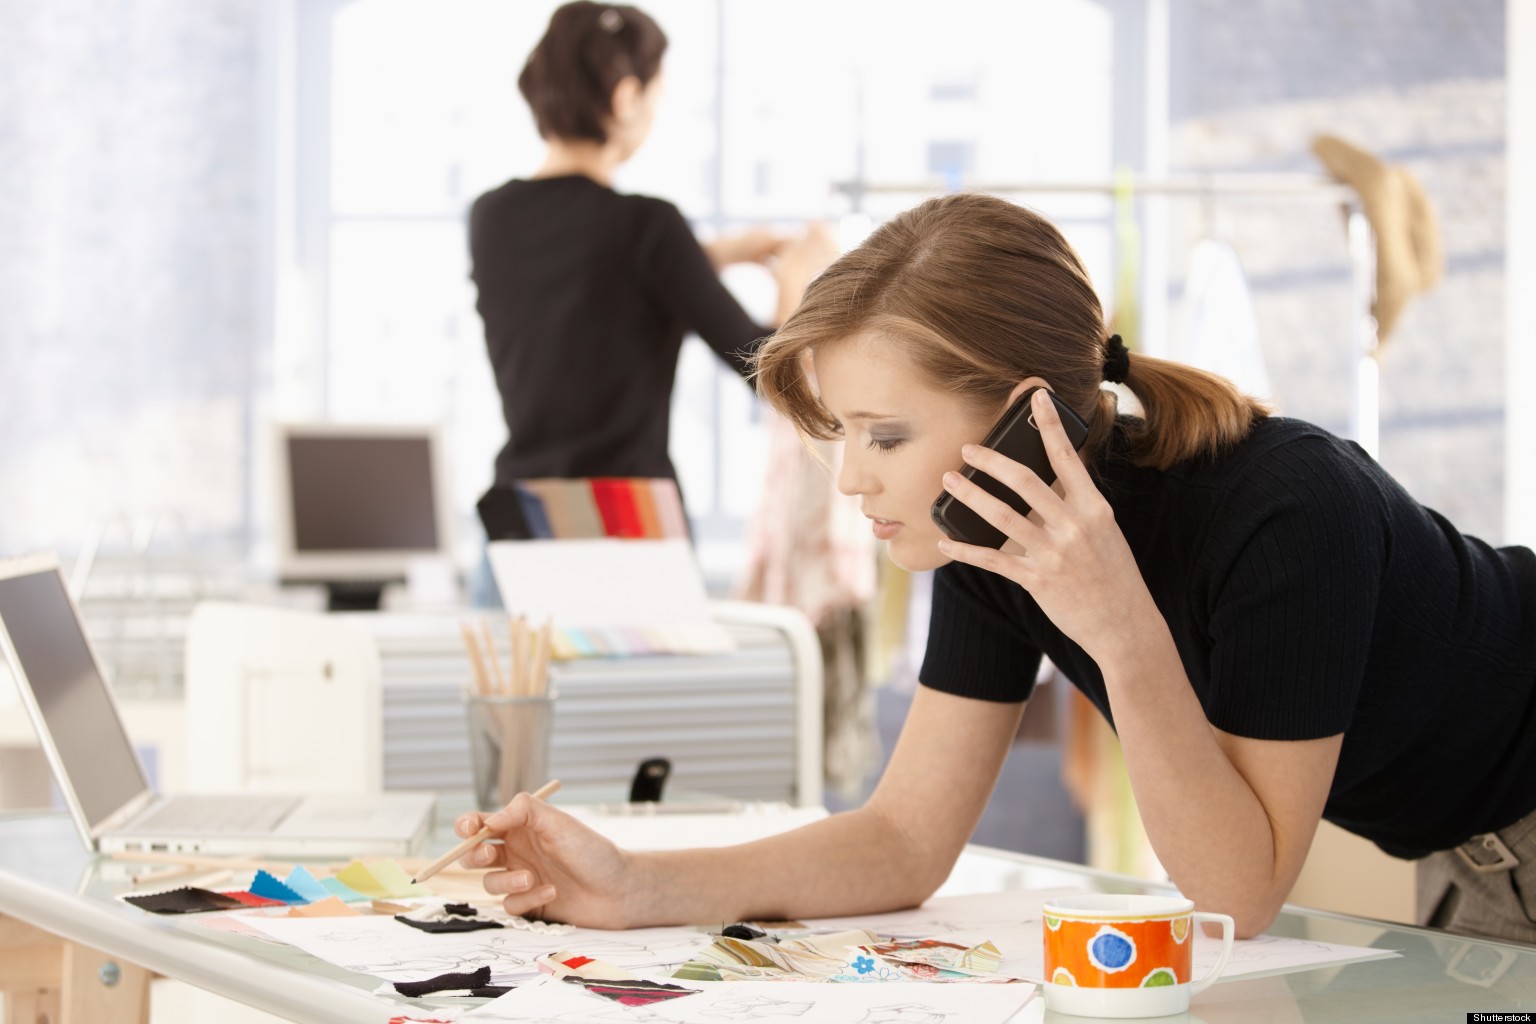 Young attractive female fashion designer leaning on office desk, talking on mobile phone.?; Shutterstock ID 78531826; PO: The Huffington Post; Job: The Huffington Post; Client: The Huffington Post; Other: The Huffington Post